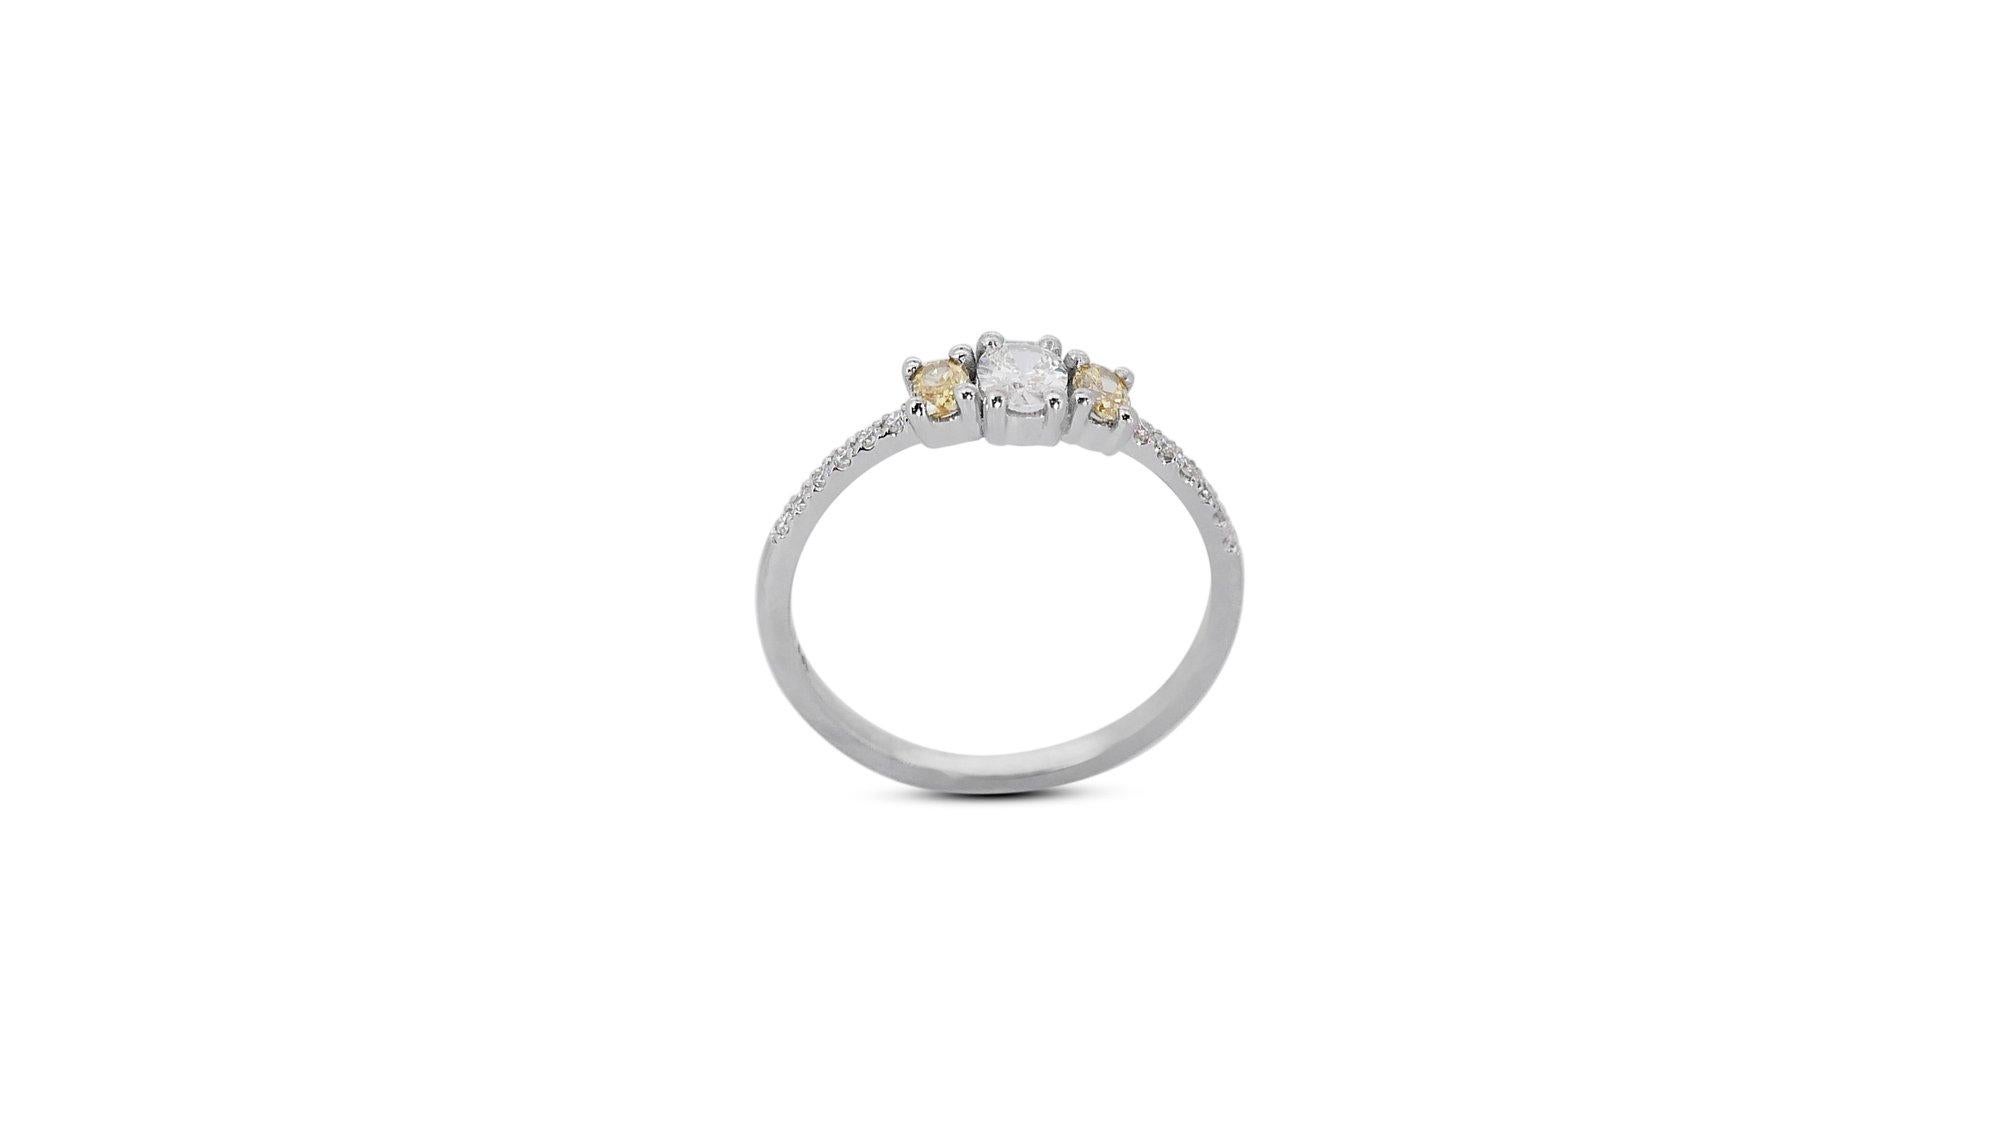 Exquisite 18 kt. White Gold Ring with 0.62 ct Total Natural Diamond - IGI Cert 3